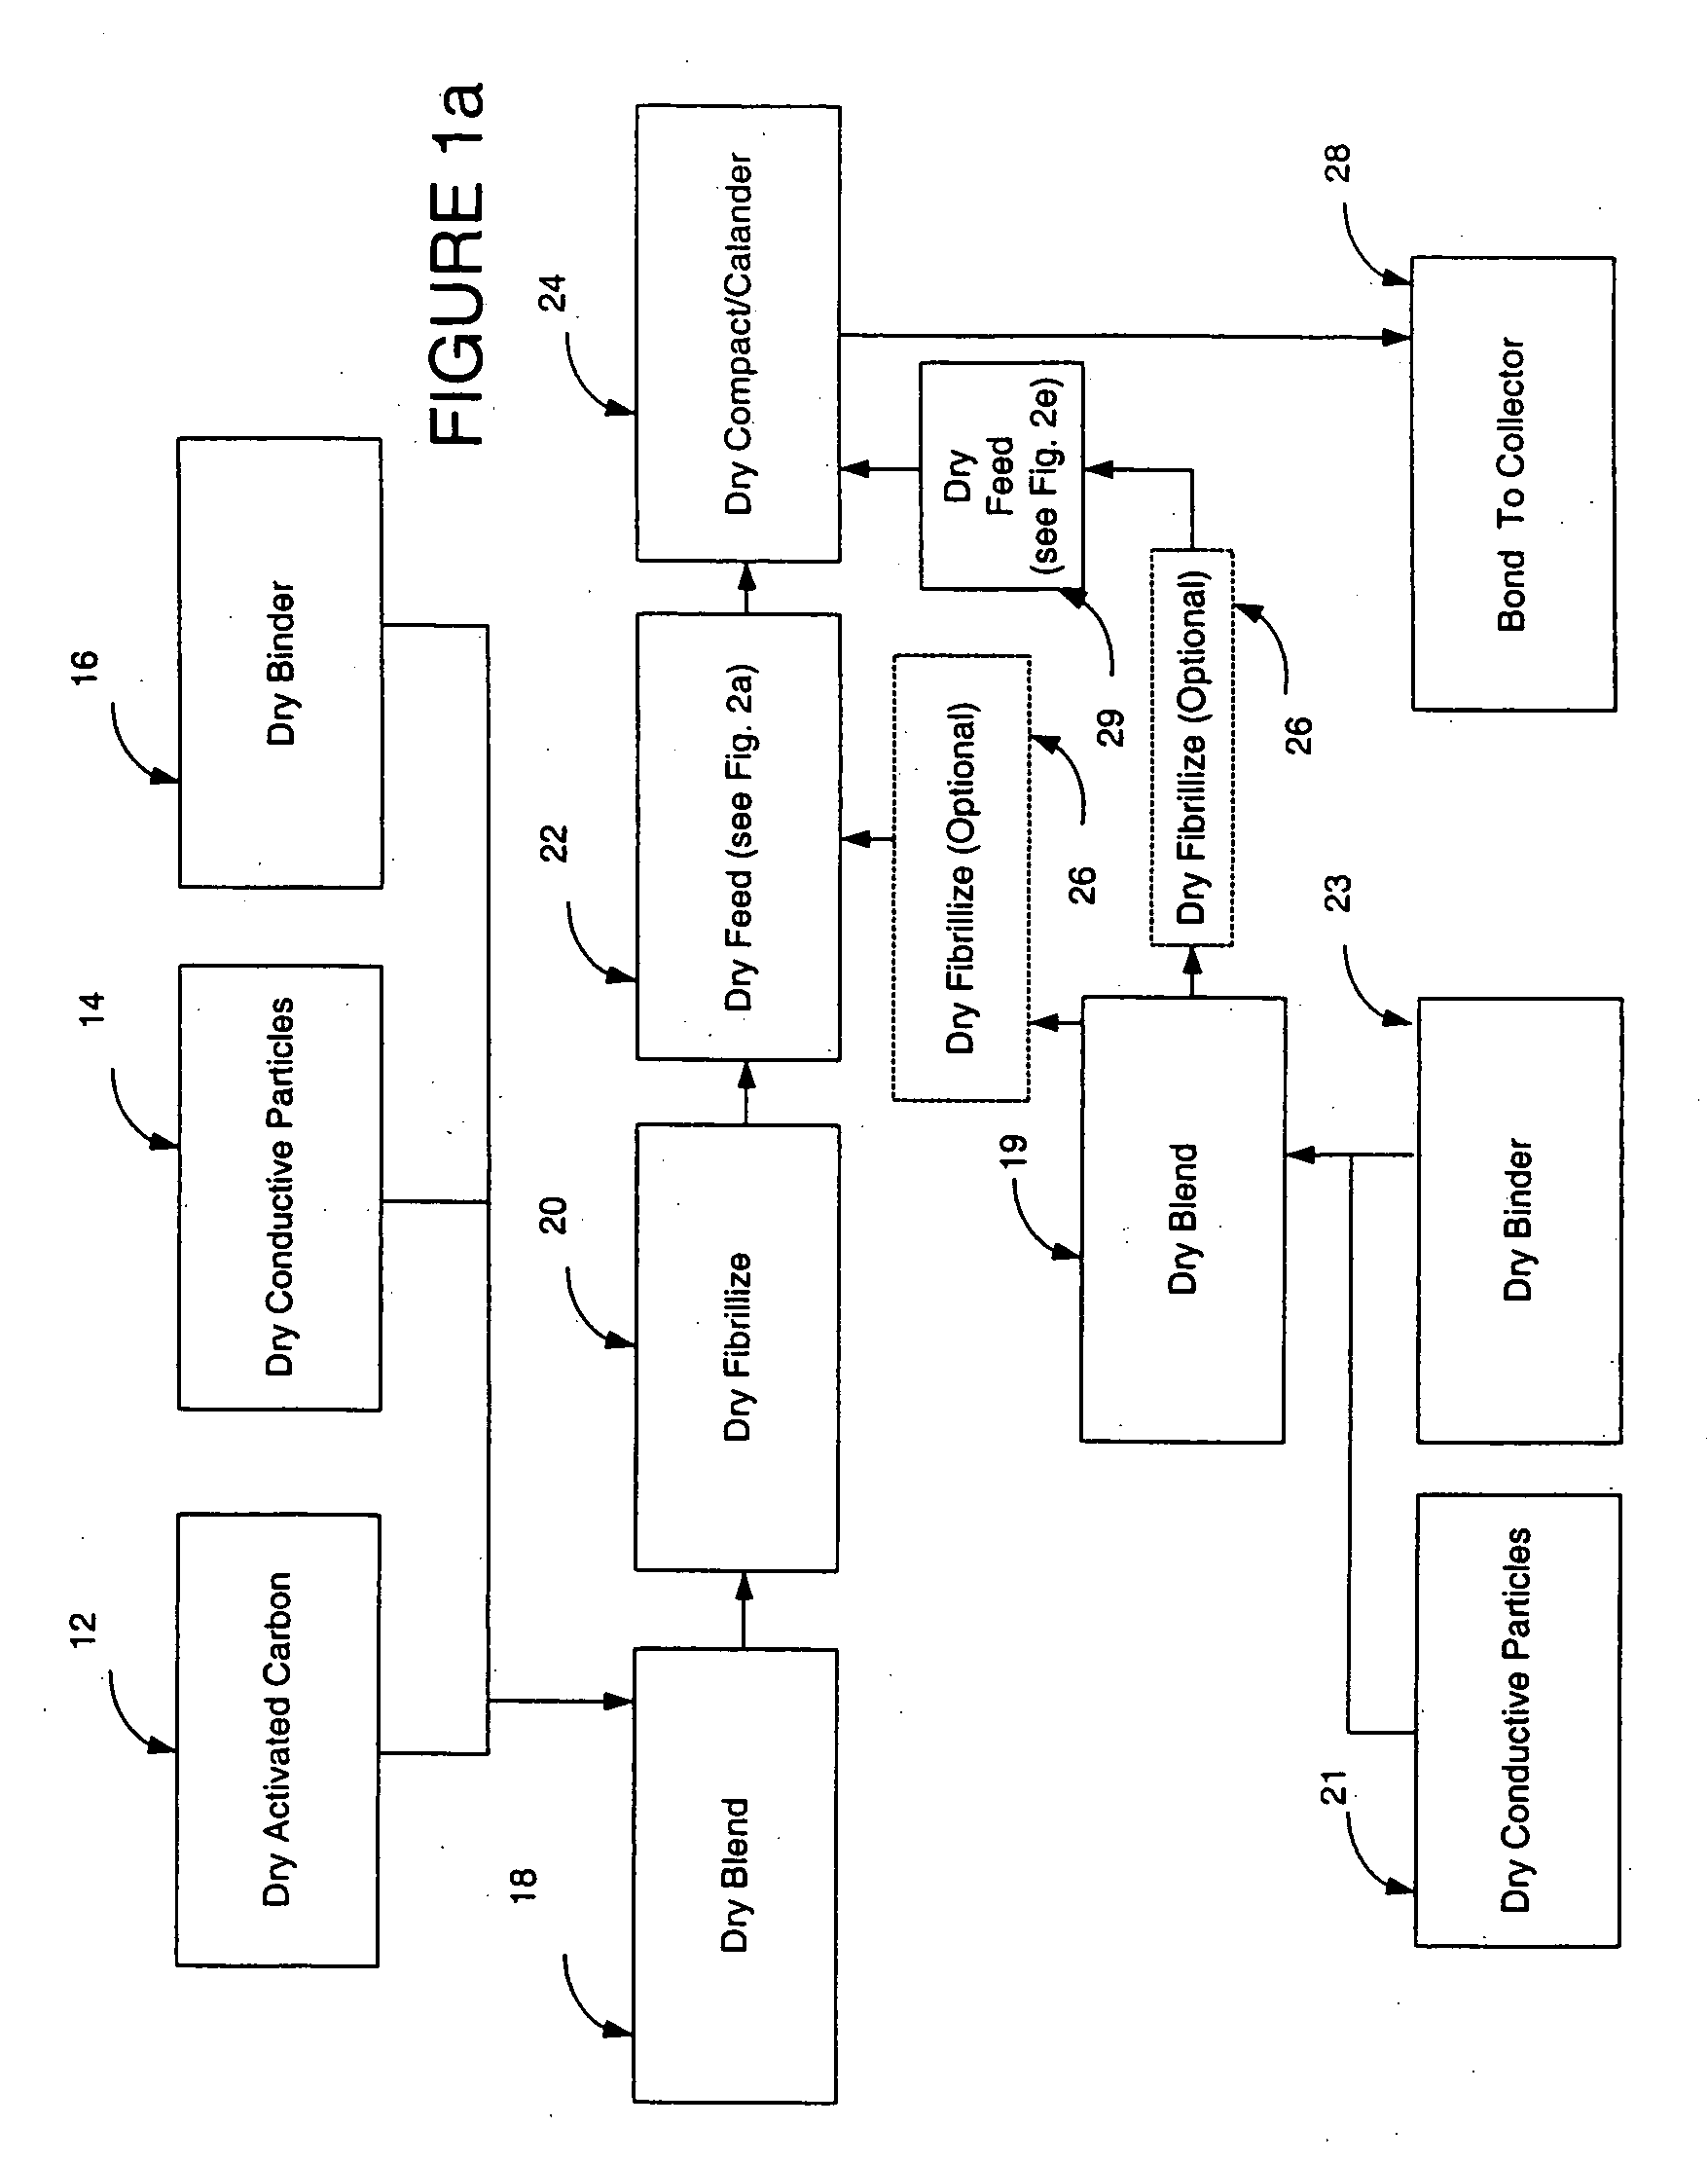 Dry particle based adhesive electrode and methods of making same